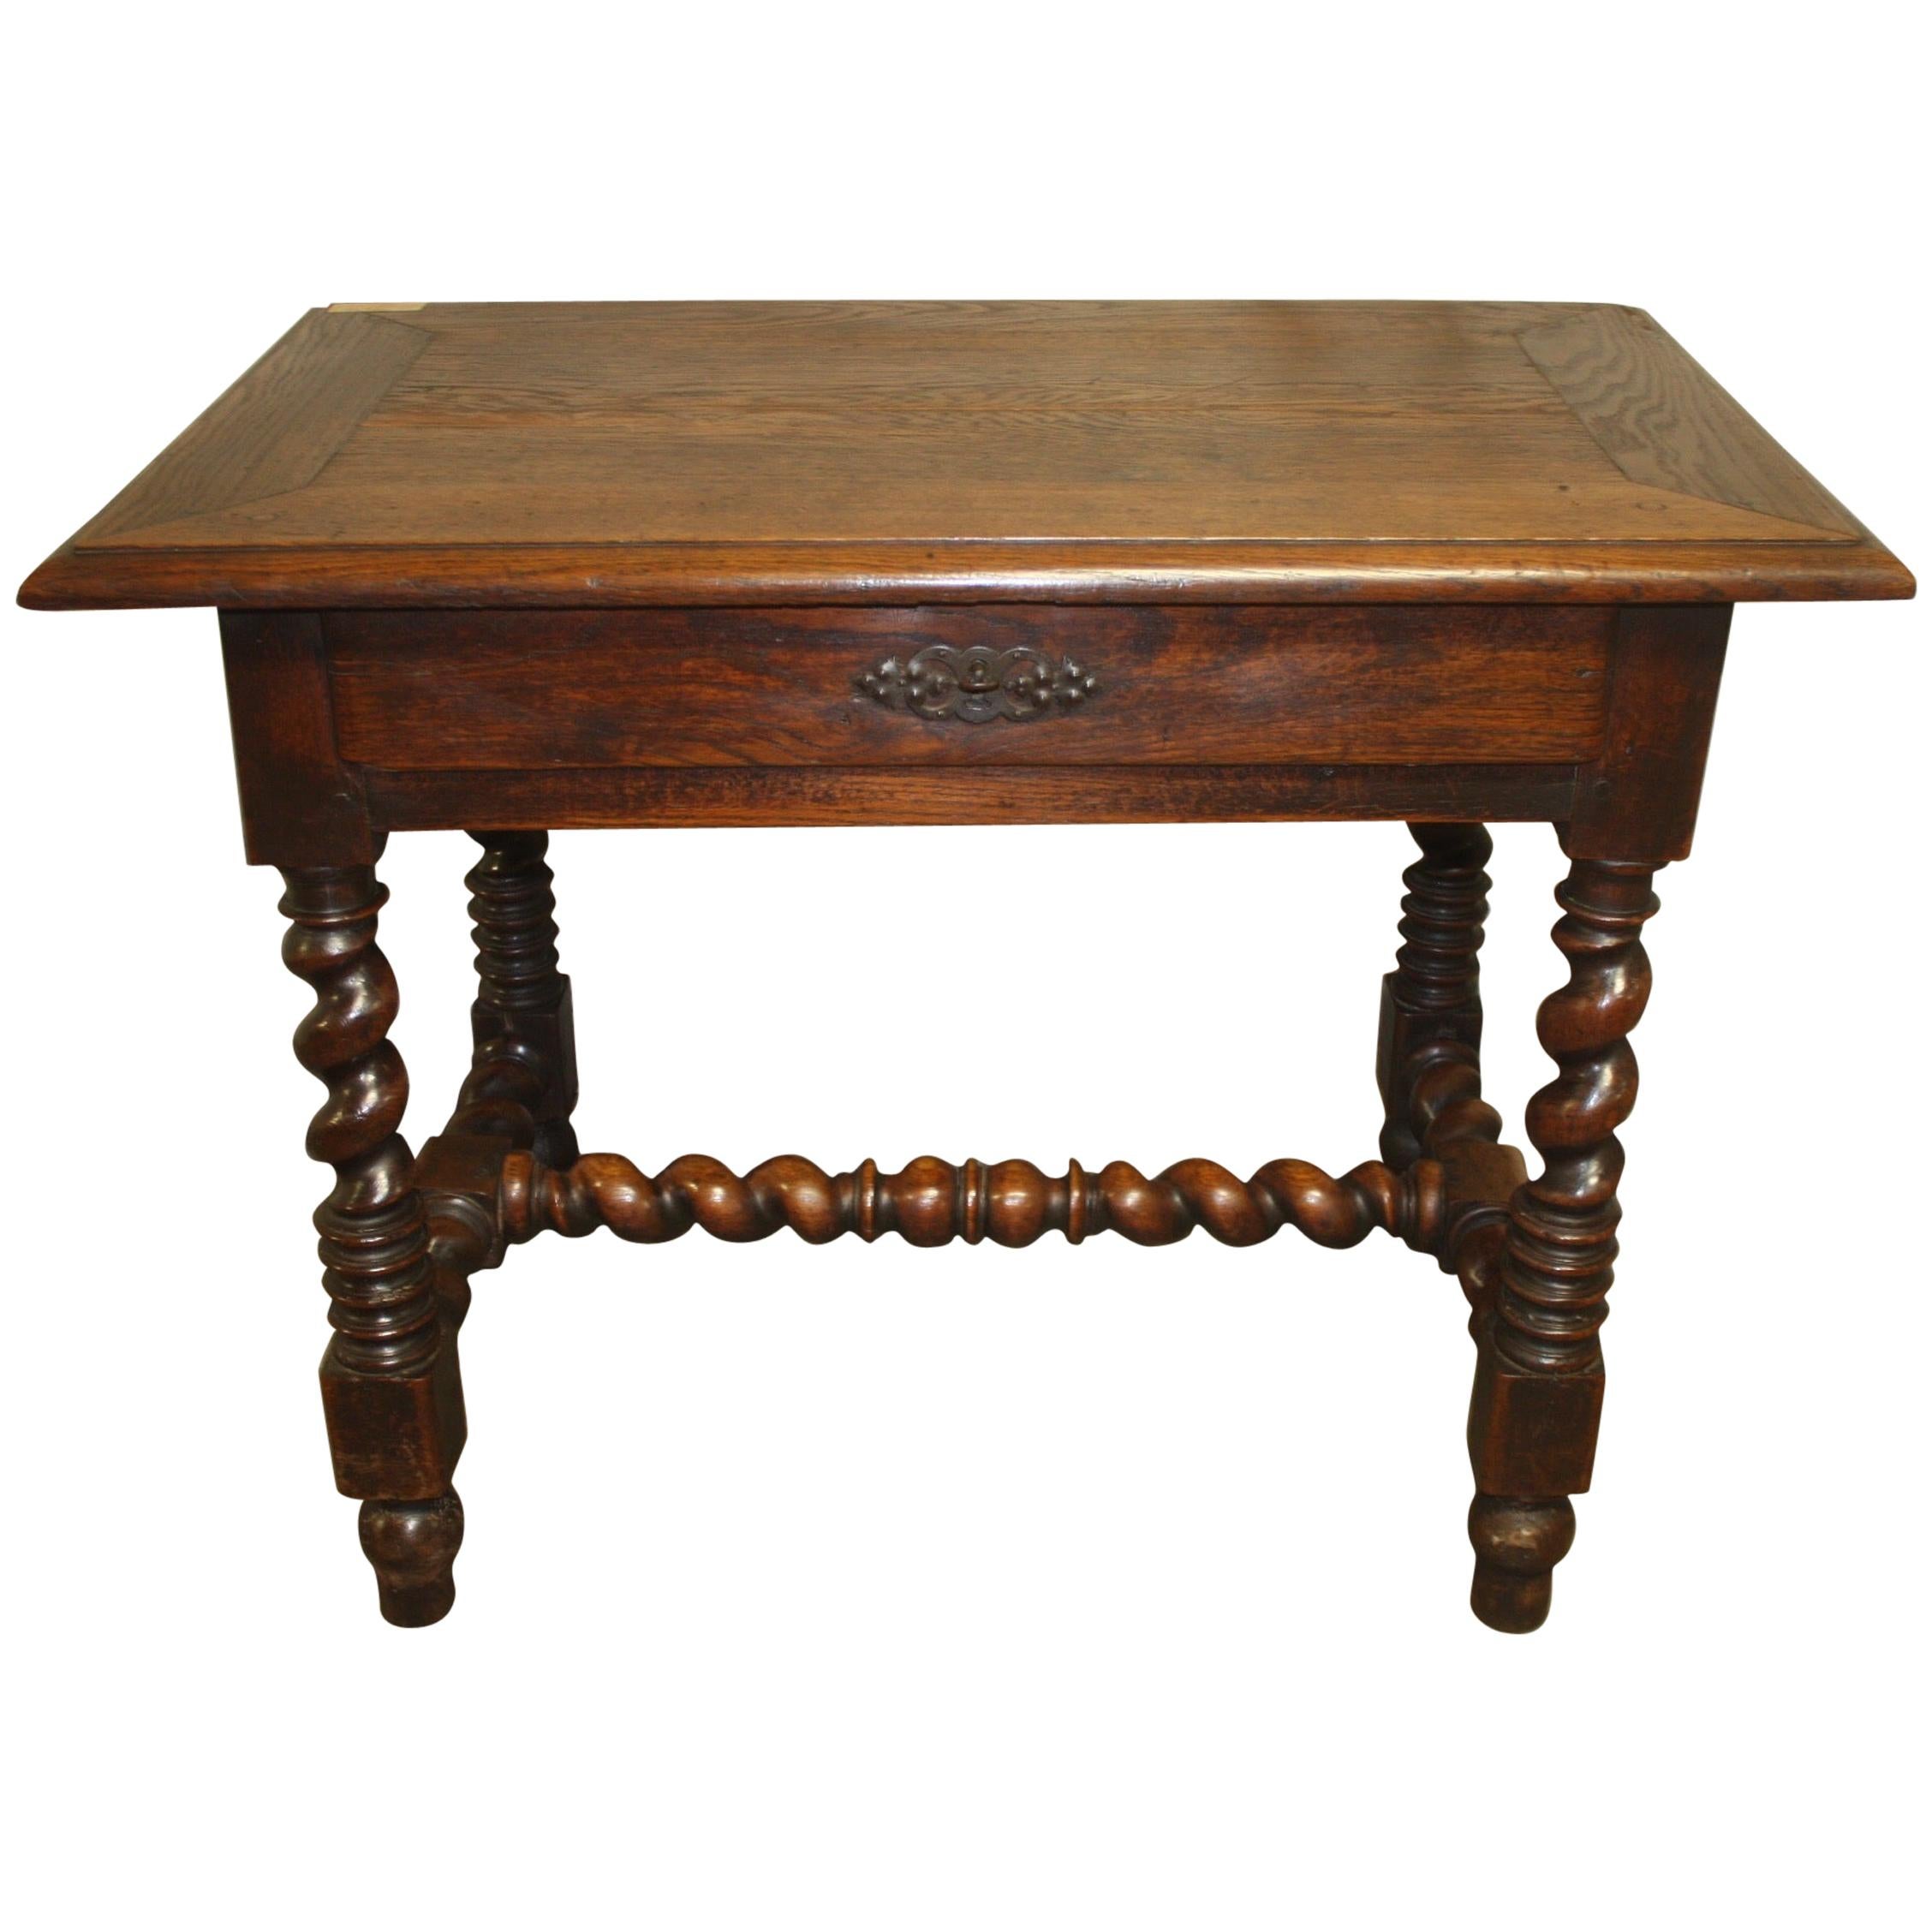 Early 18th Century French Writing Table